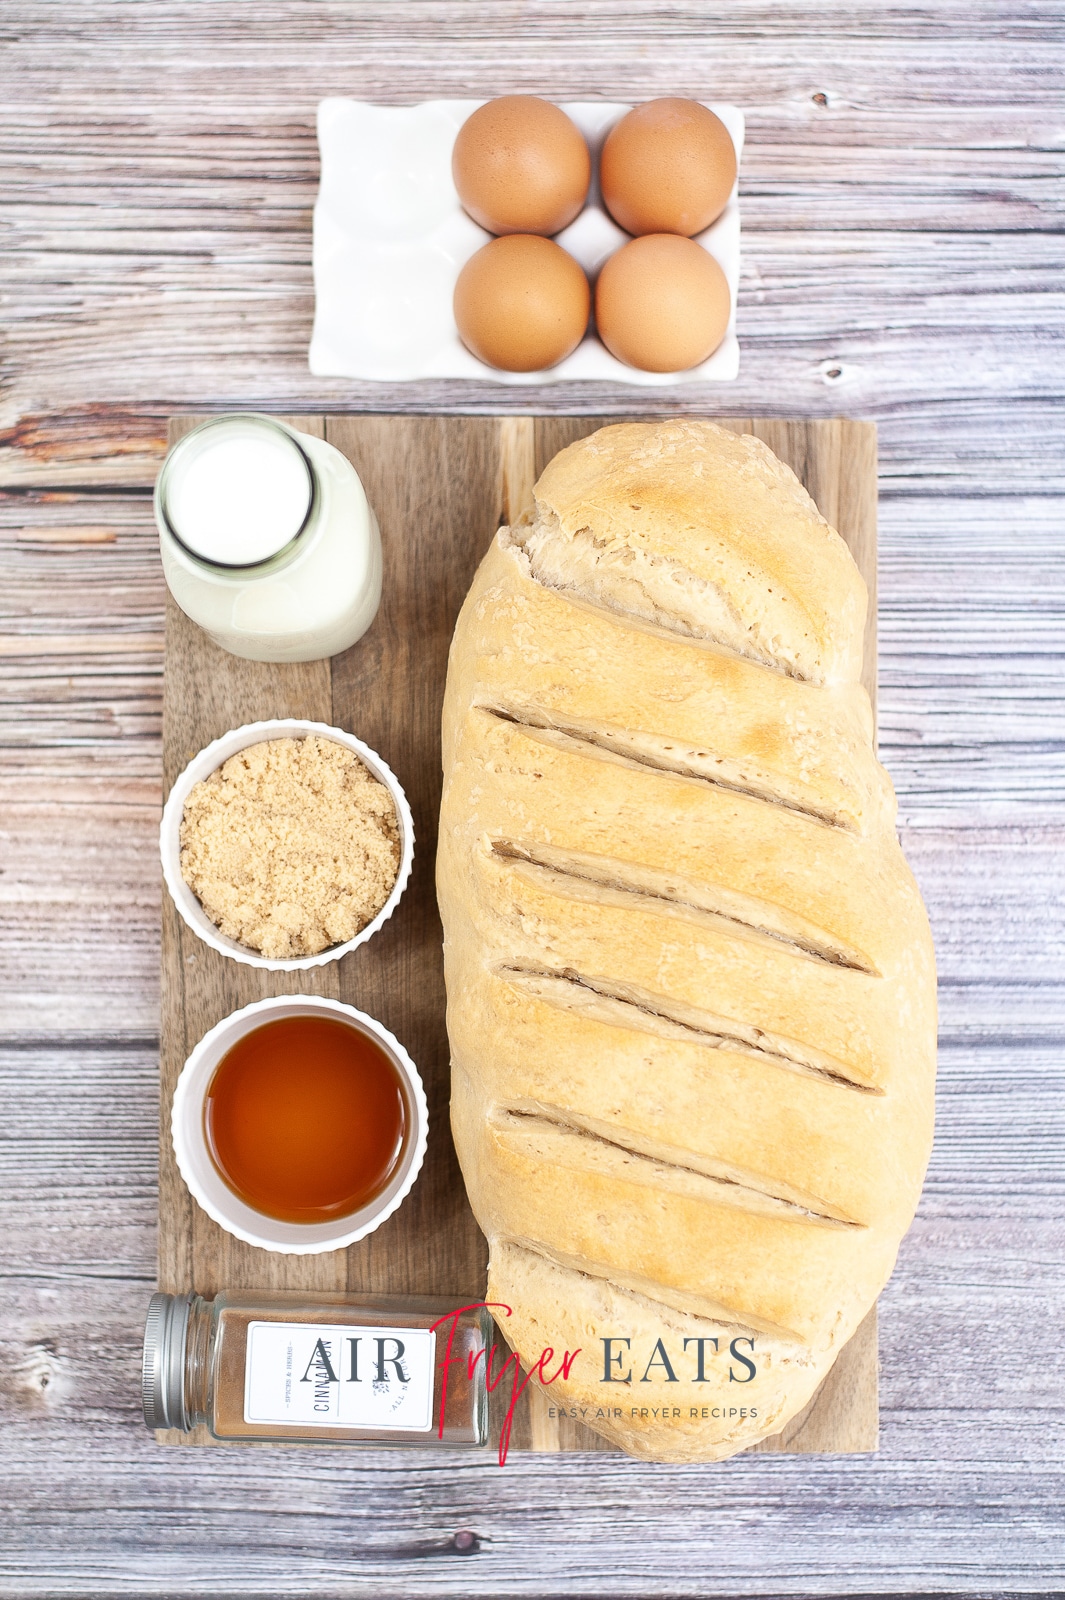 Vertical photo of ingredients required to make air fryer french toast. French bread loaf, milk, eggs and spices